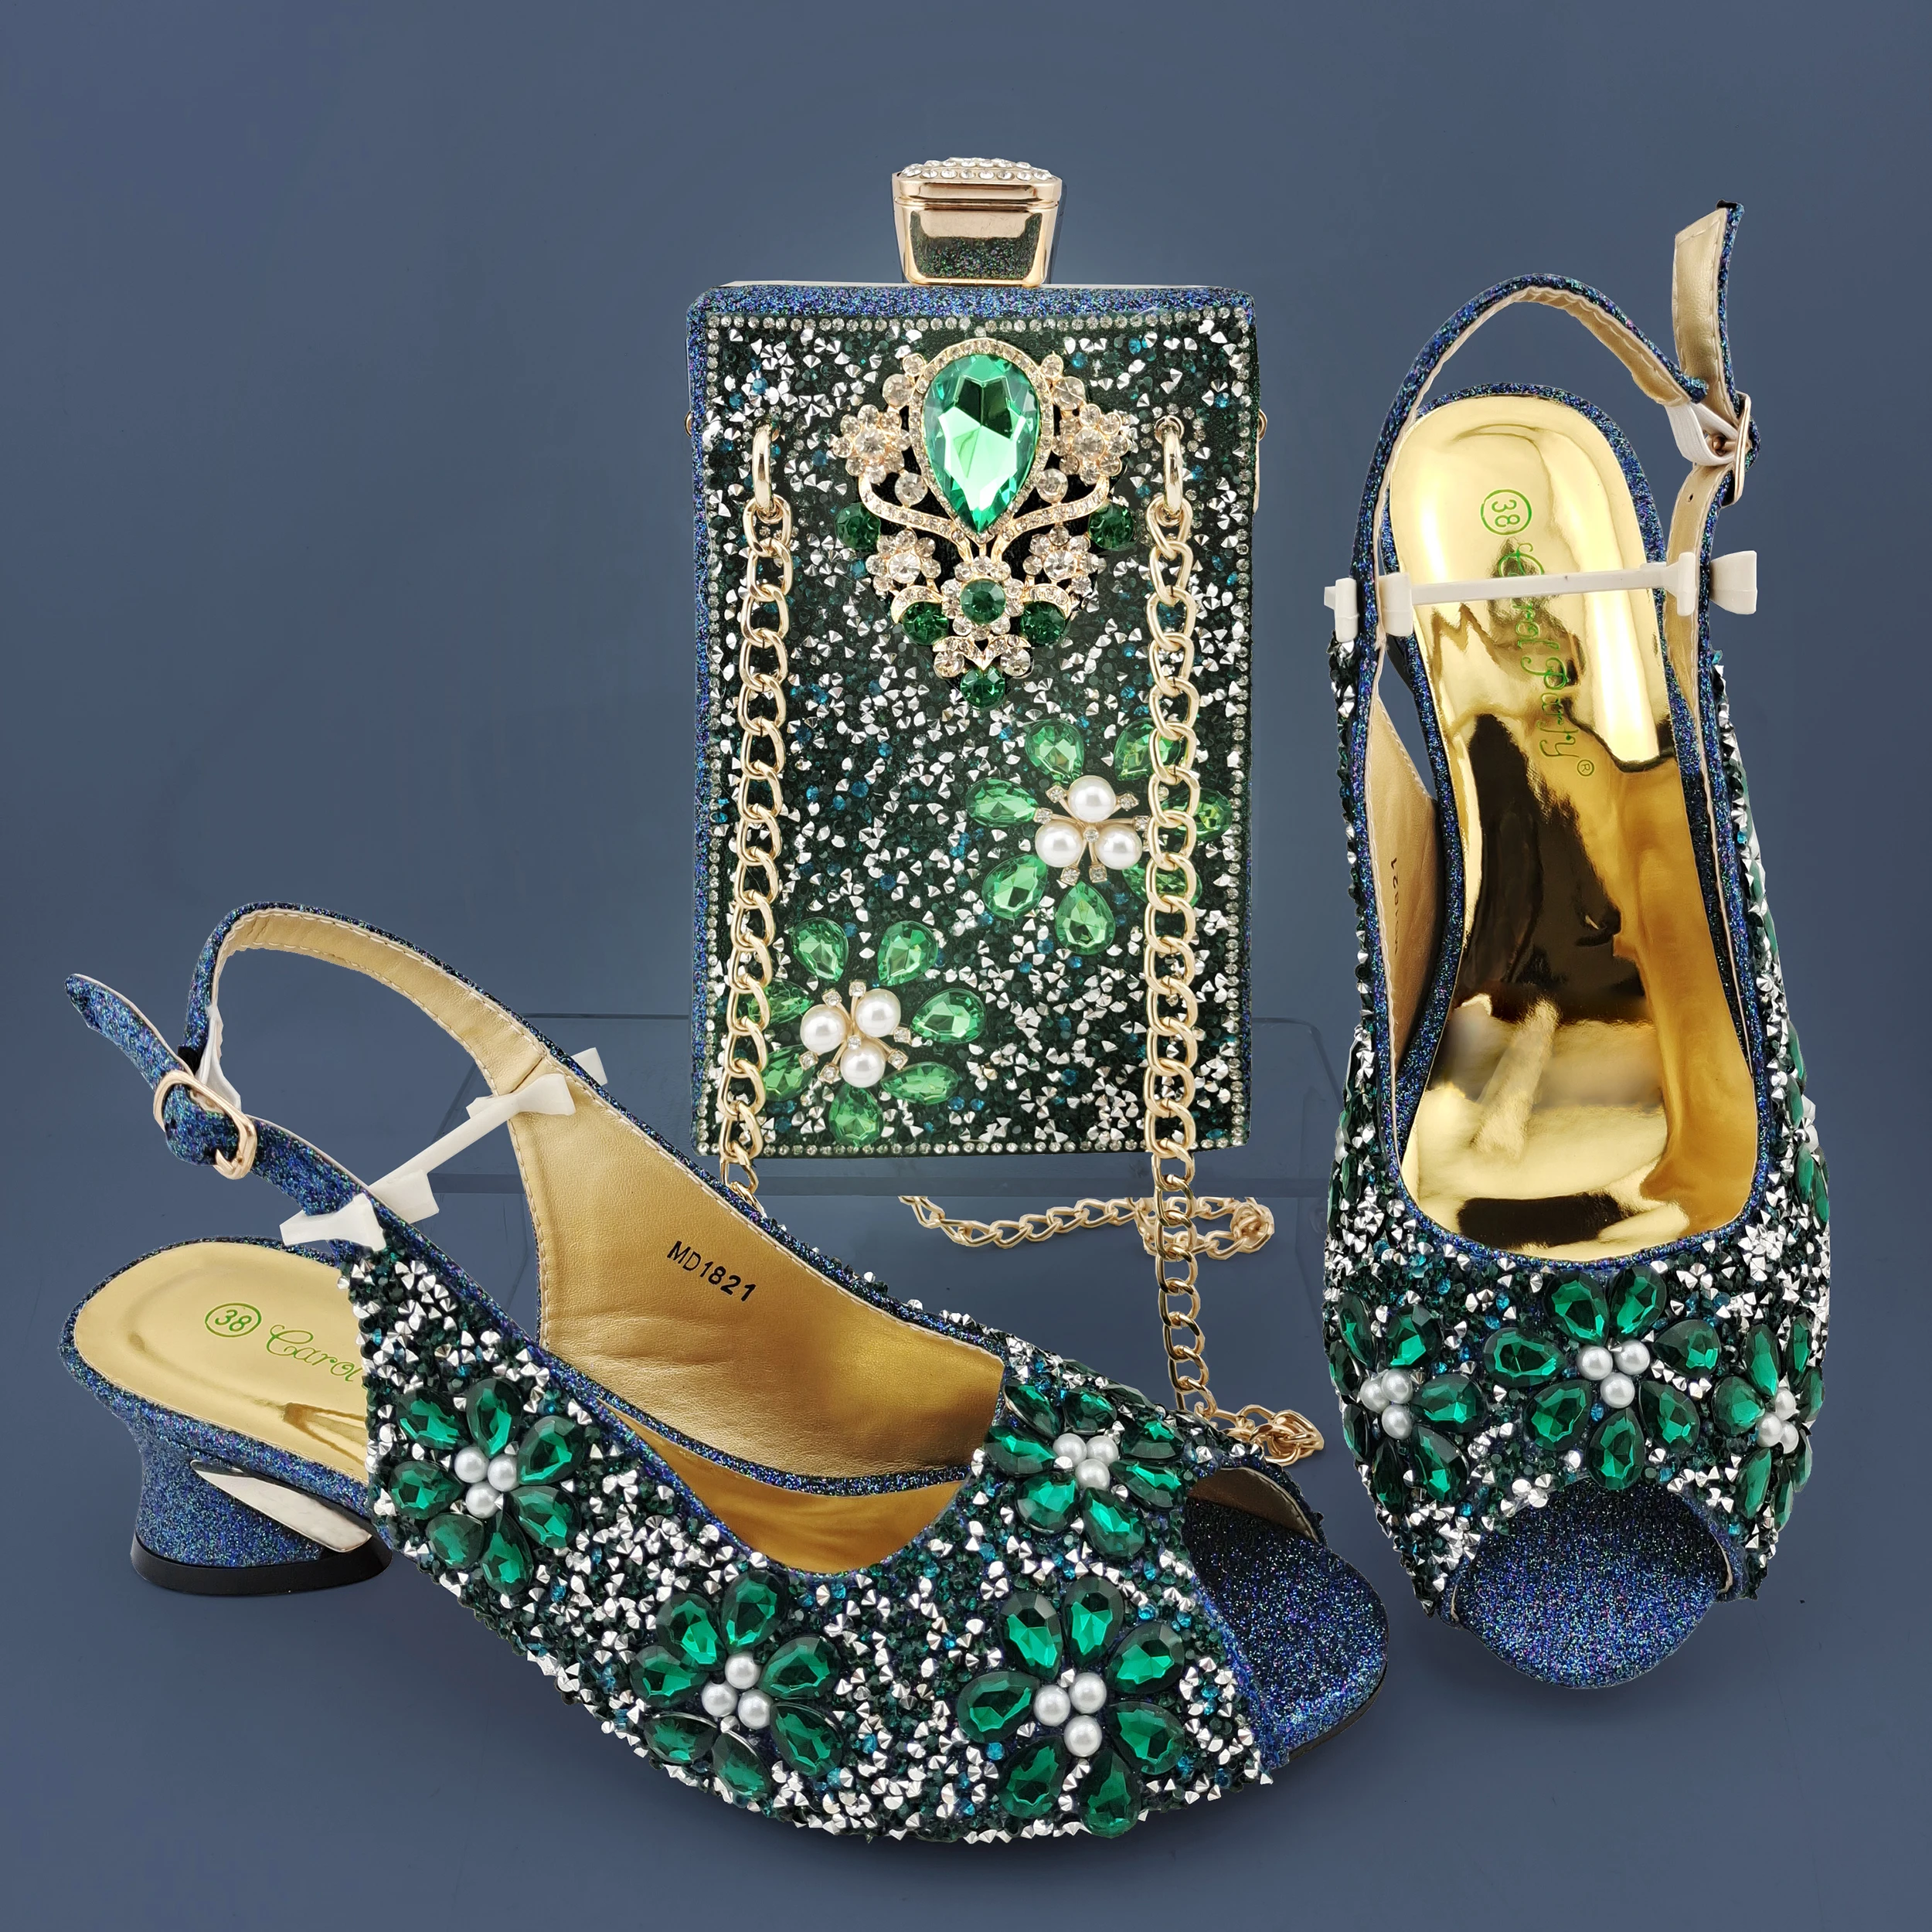 Carol Party Newest Shiny sweet type  rhinestone accessories Ladies Shoes and Bag Set in Green Color